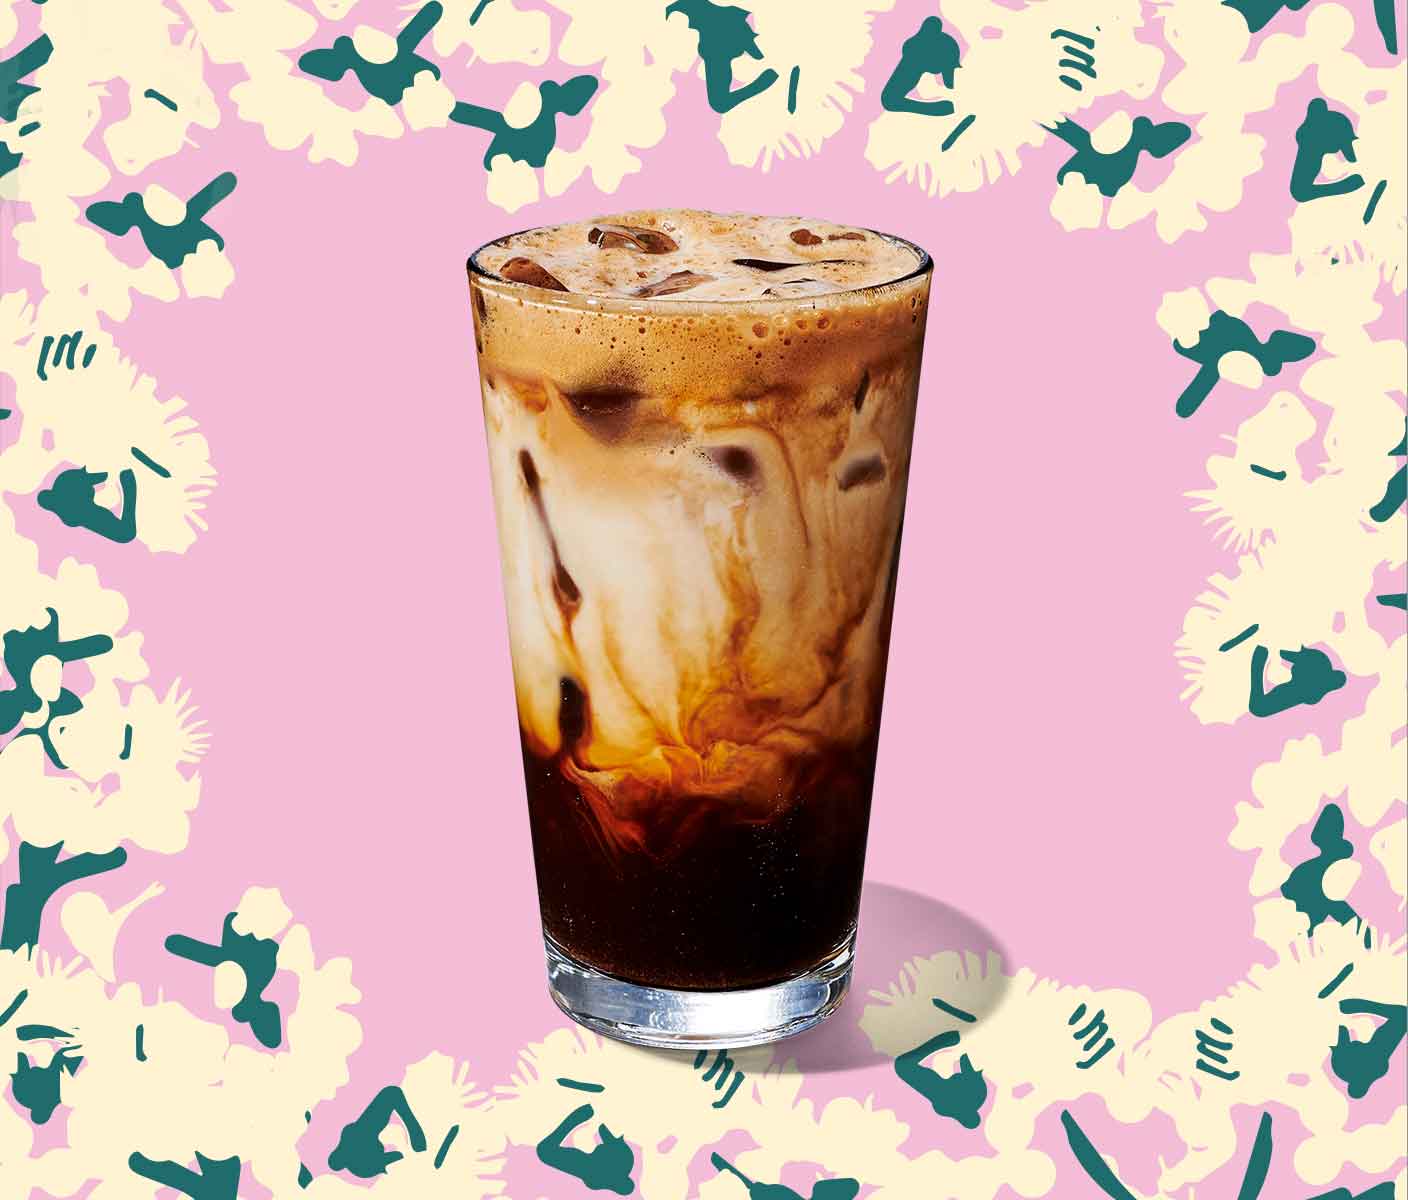 Iced espresso drink with creamy layers in a tall glass.